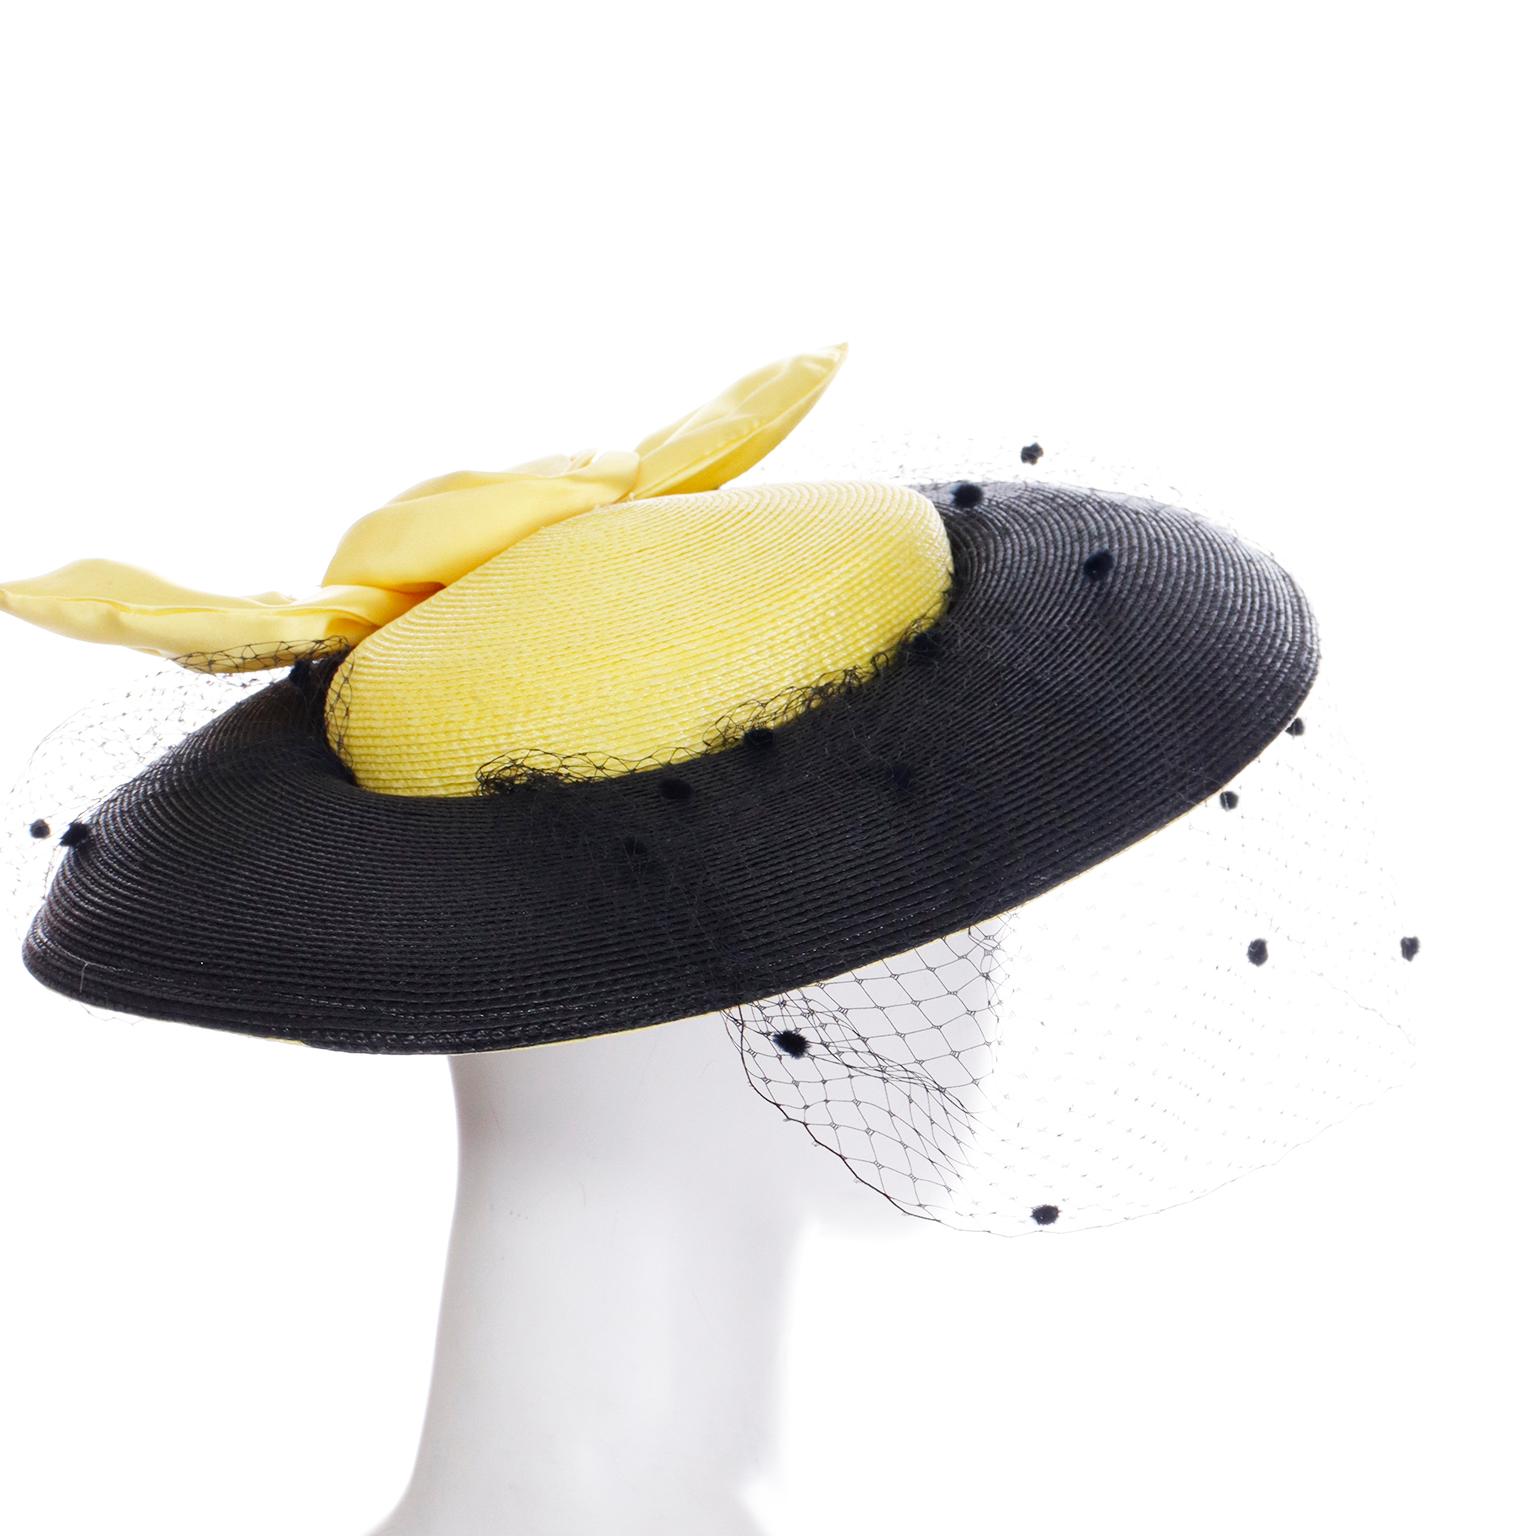 Doris Vintage Black & Yellow Straw Hat w Yellow Satin Bow & Polka Dot Net In Excellent Condition For Sale In Portland, OR